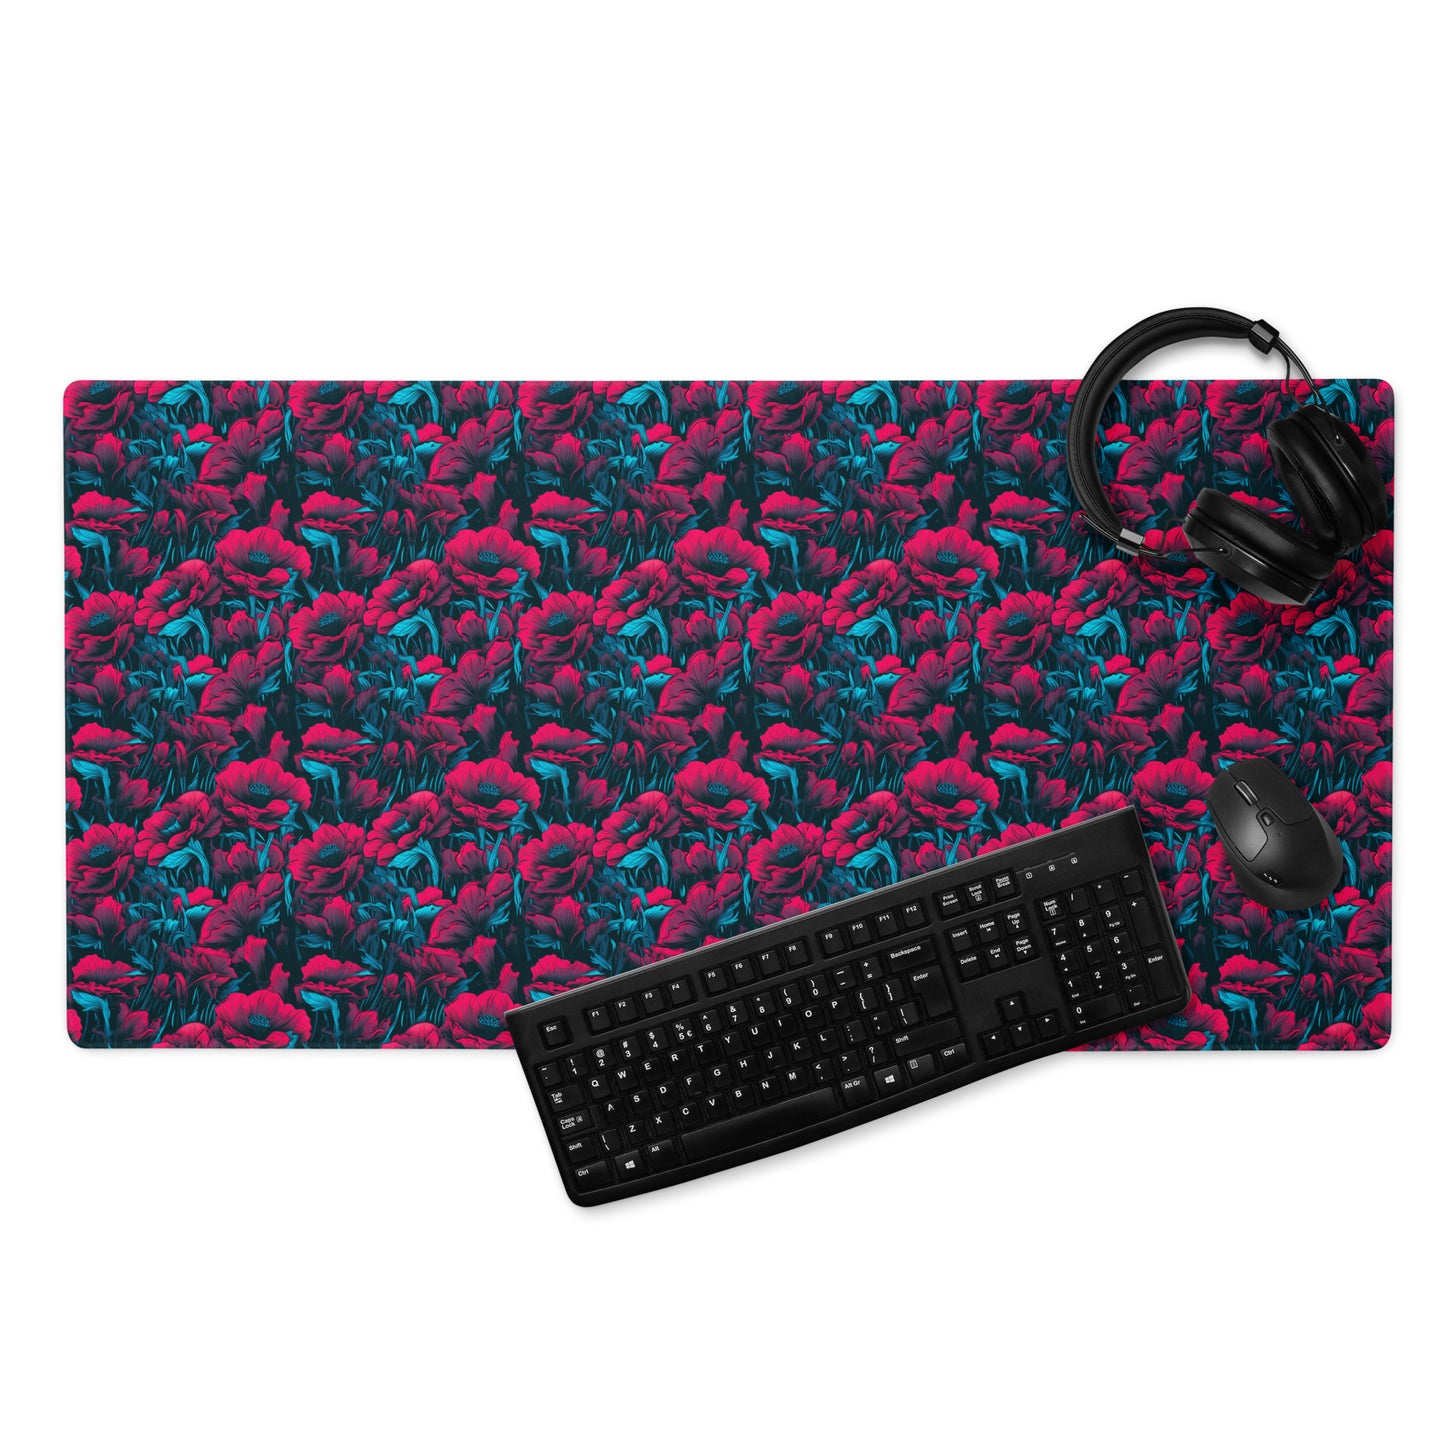 A 36" x 18" desk pad with a red and blue floral pattern. With a keyboard, mouse, and headphones sitting on it.